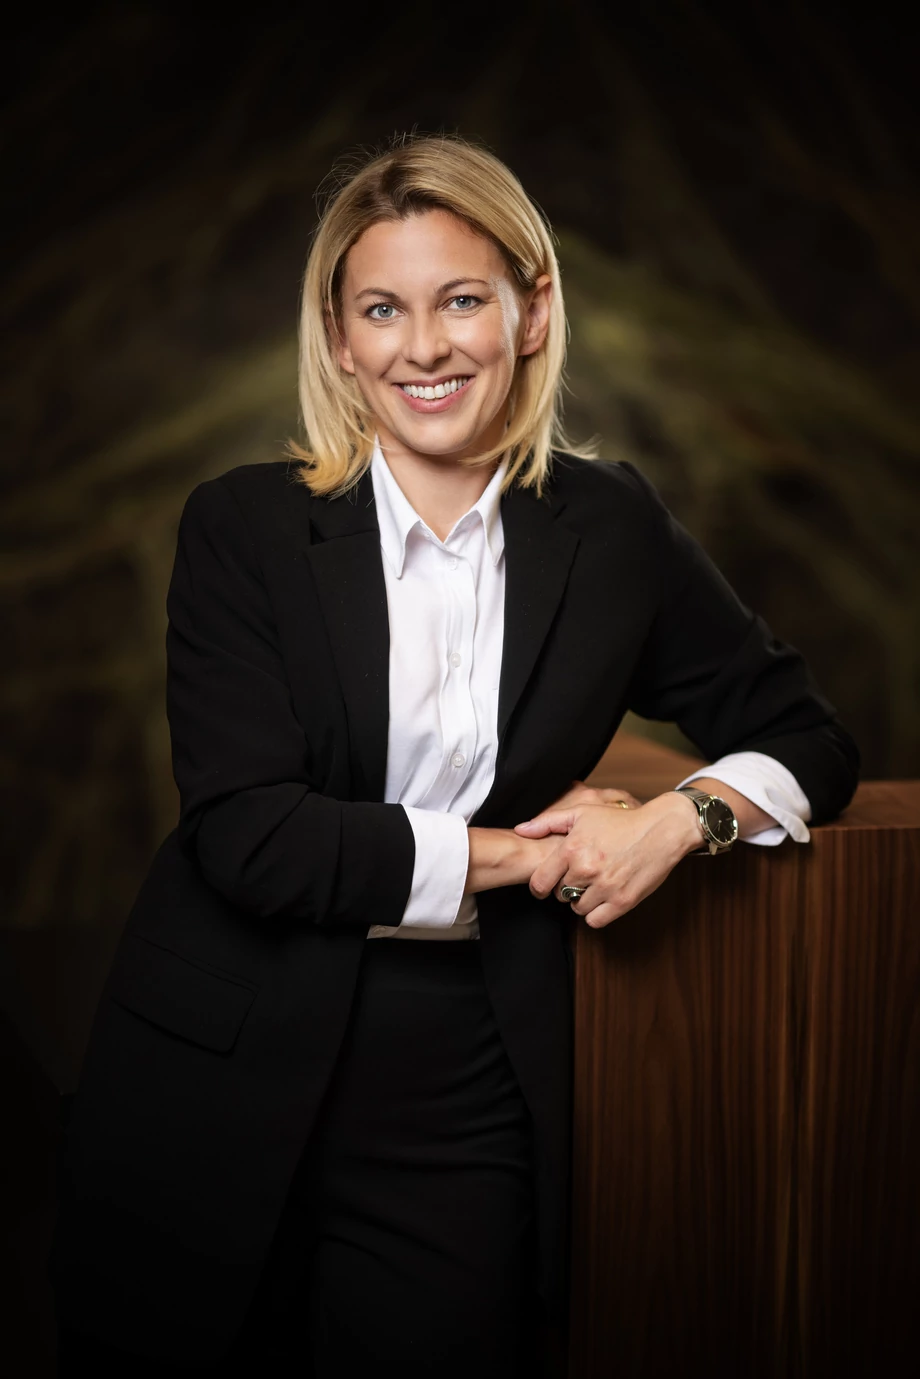 Adriana Jarczyńska. Senior manager at Nexdigm, attorney-at-law with over ten years of professional experience in law firms and international corporations. She is a specialist in personal data protection law (CIPP/E) and new technologies.